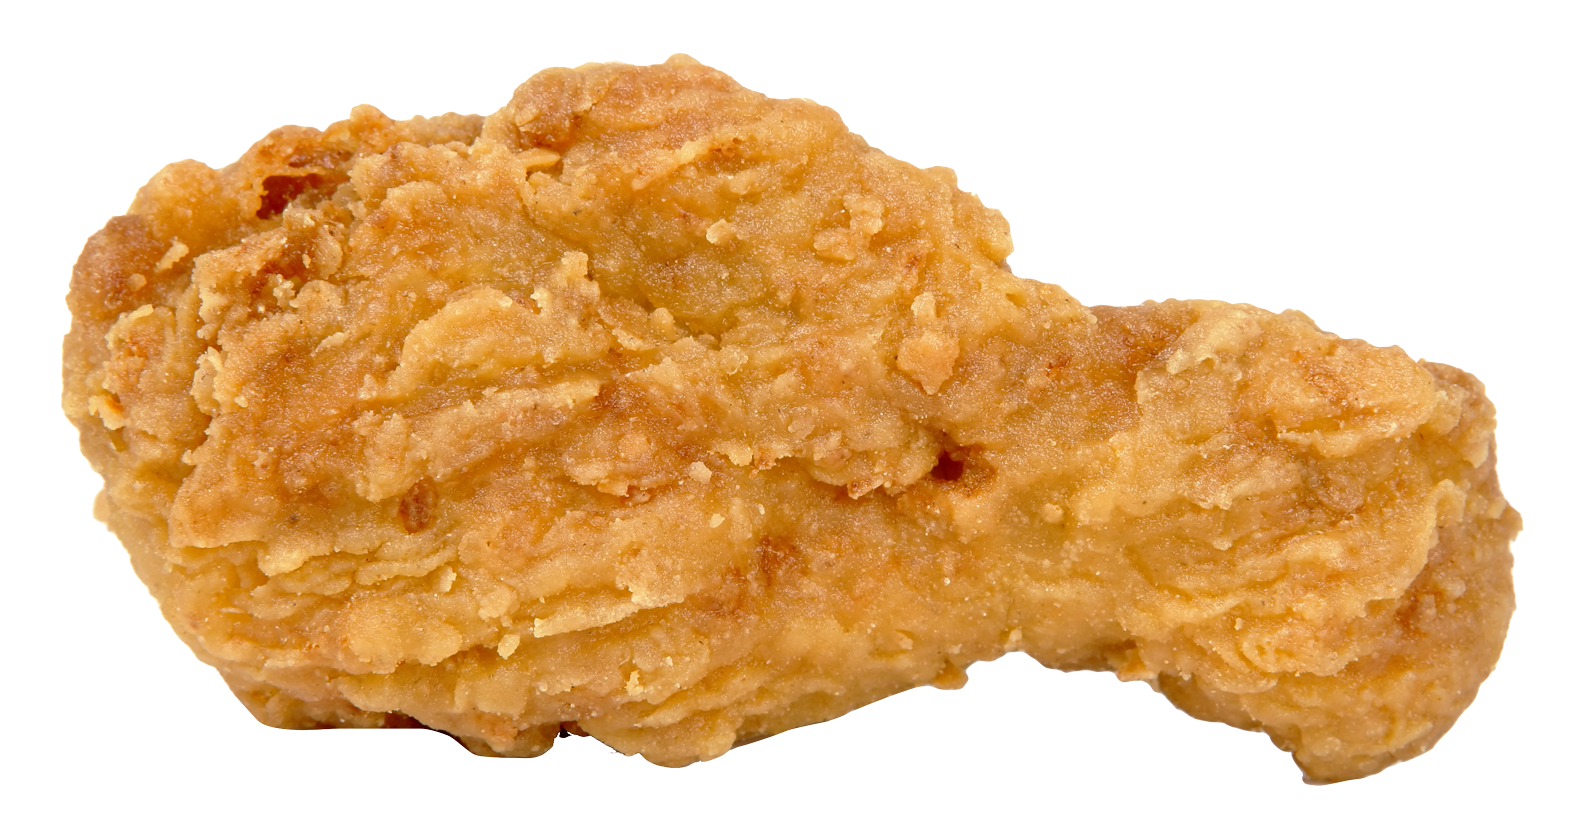 Fried png image purepng. Mcdonalds clipart chicken fry